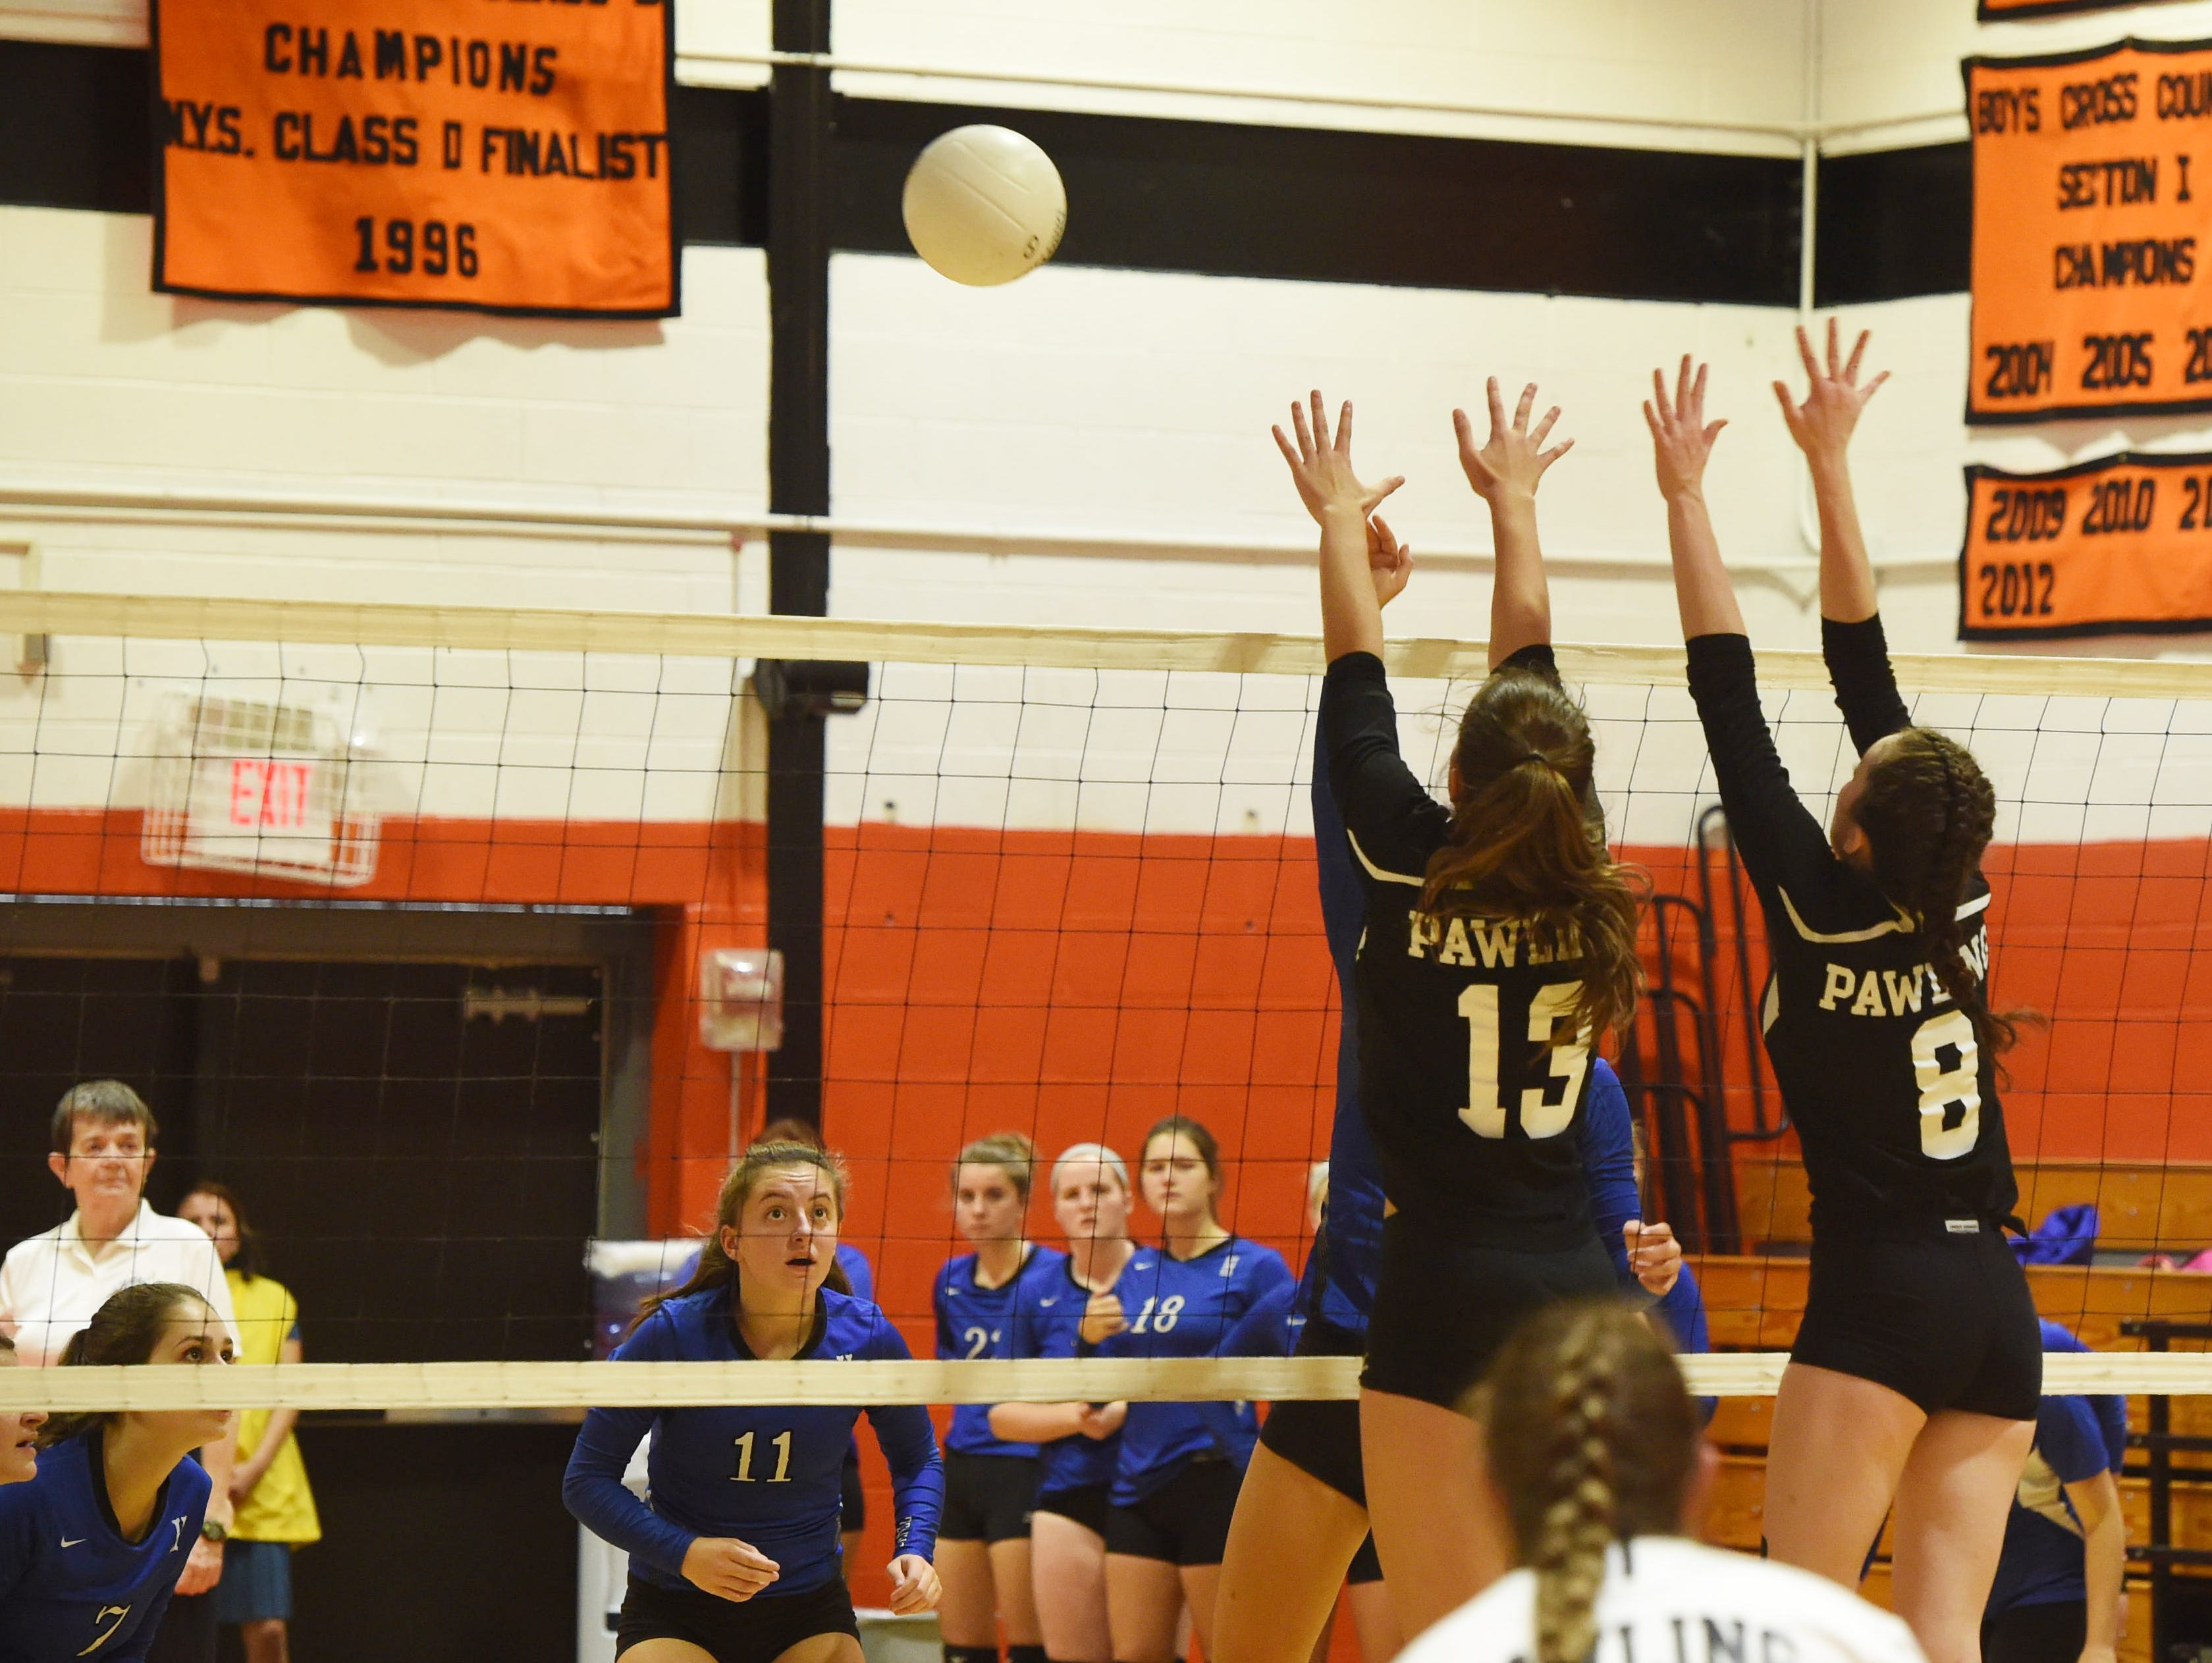 Scenes from Wednesday's volleyball game between Pawling and Haldane.